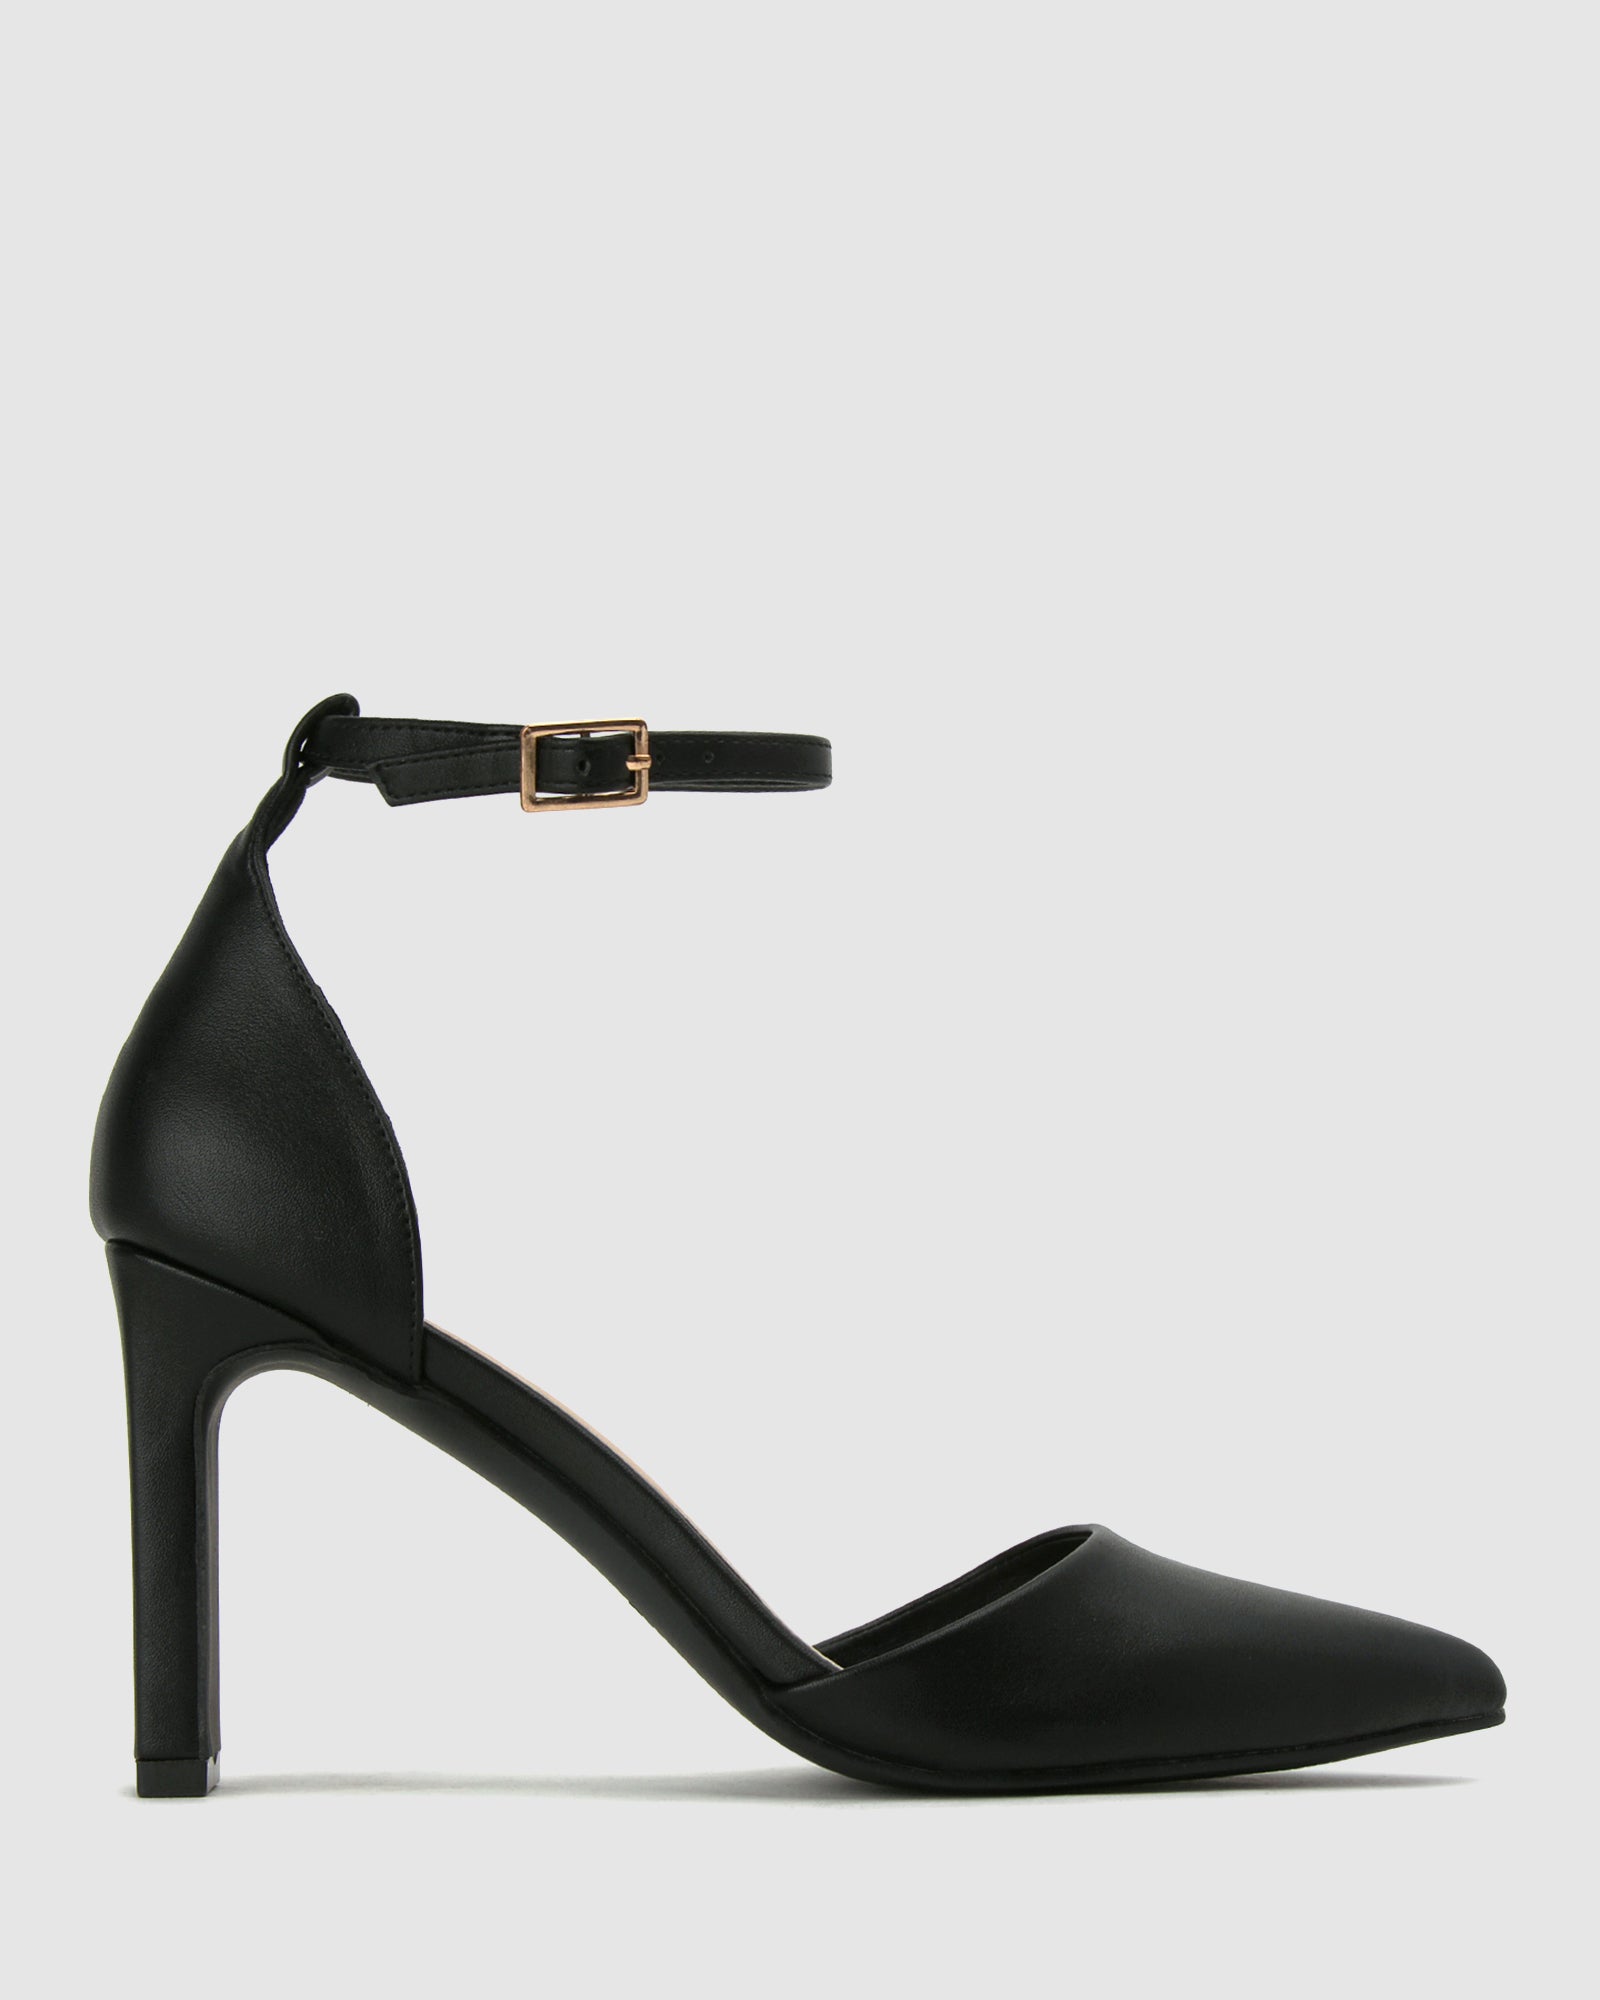 Buy LADY Pointed Toe Pumps by Betts online - Betts